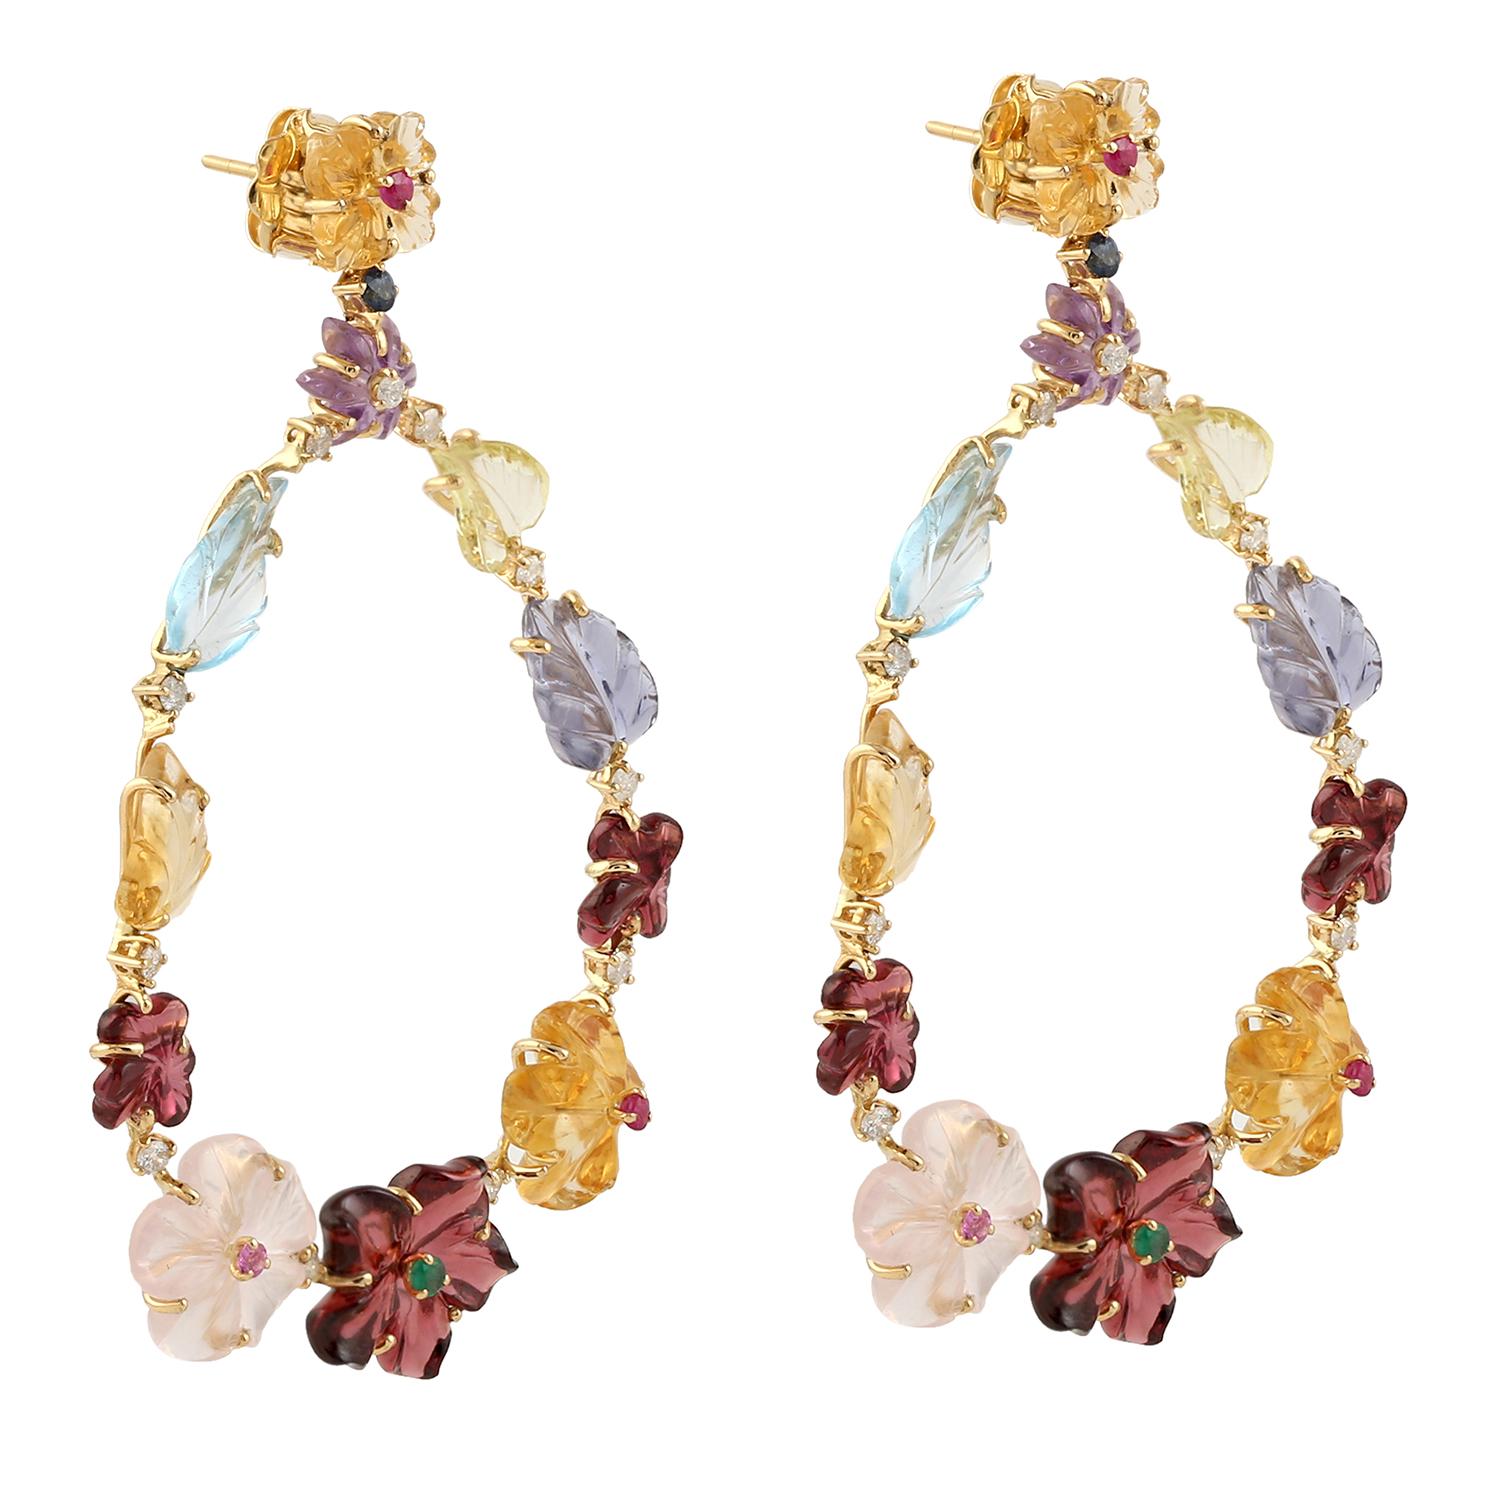 Cast in 18-karat gold. These beautiful earrings are set with 53.01 carats of carved multi gemstone, emerald, topaz, amethyst, citrine, ruby and .78 carats of sparkling diamonds.  See other flower collection matching pieces.

FOLLOW  MEGHNA JEWELS